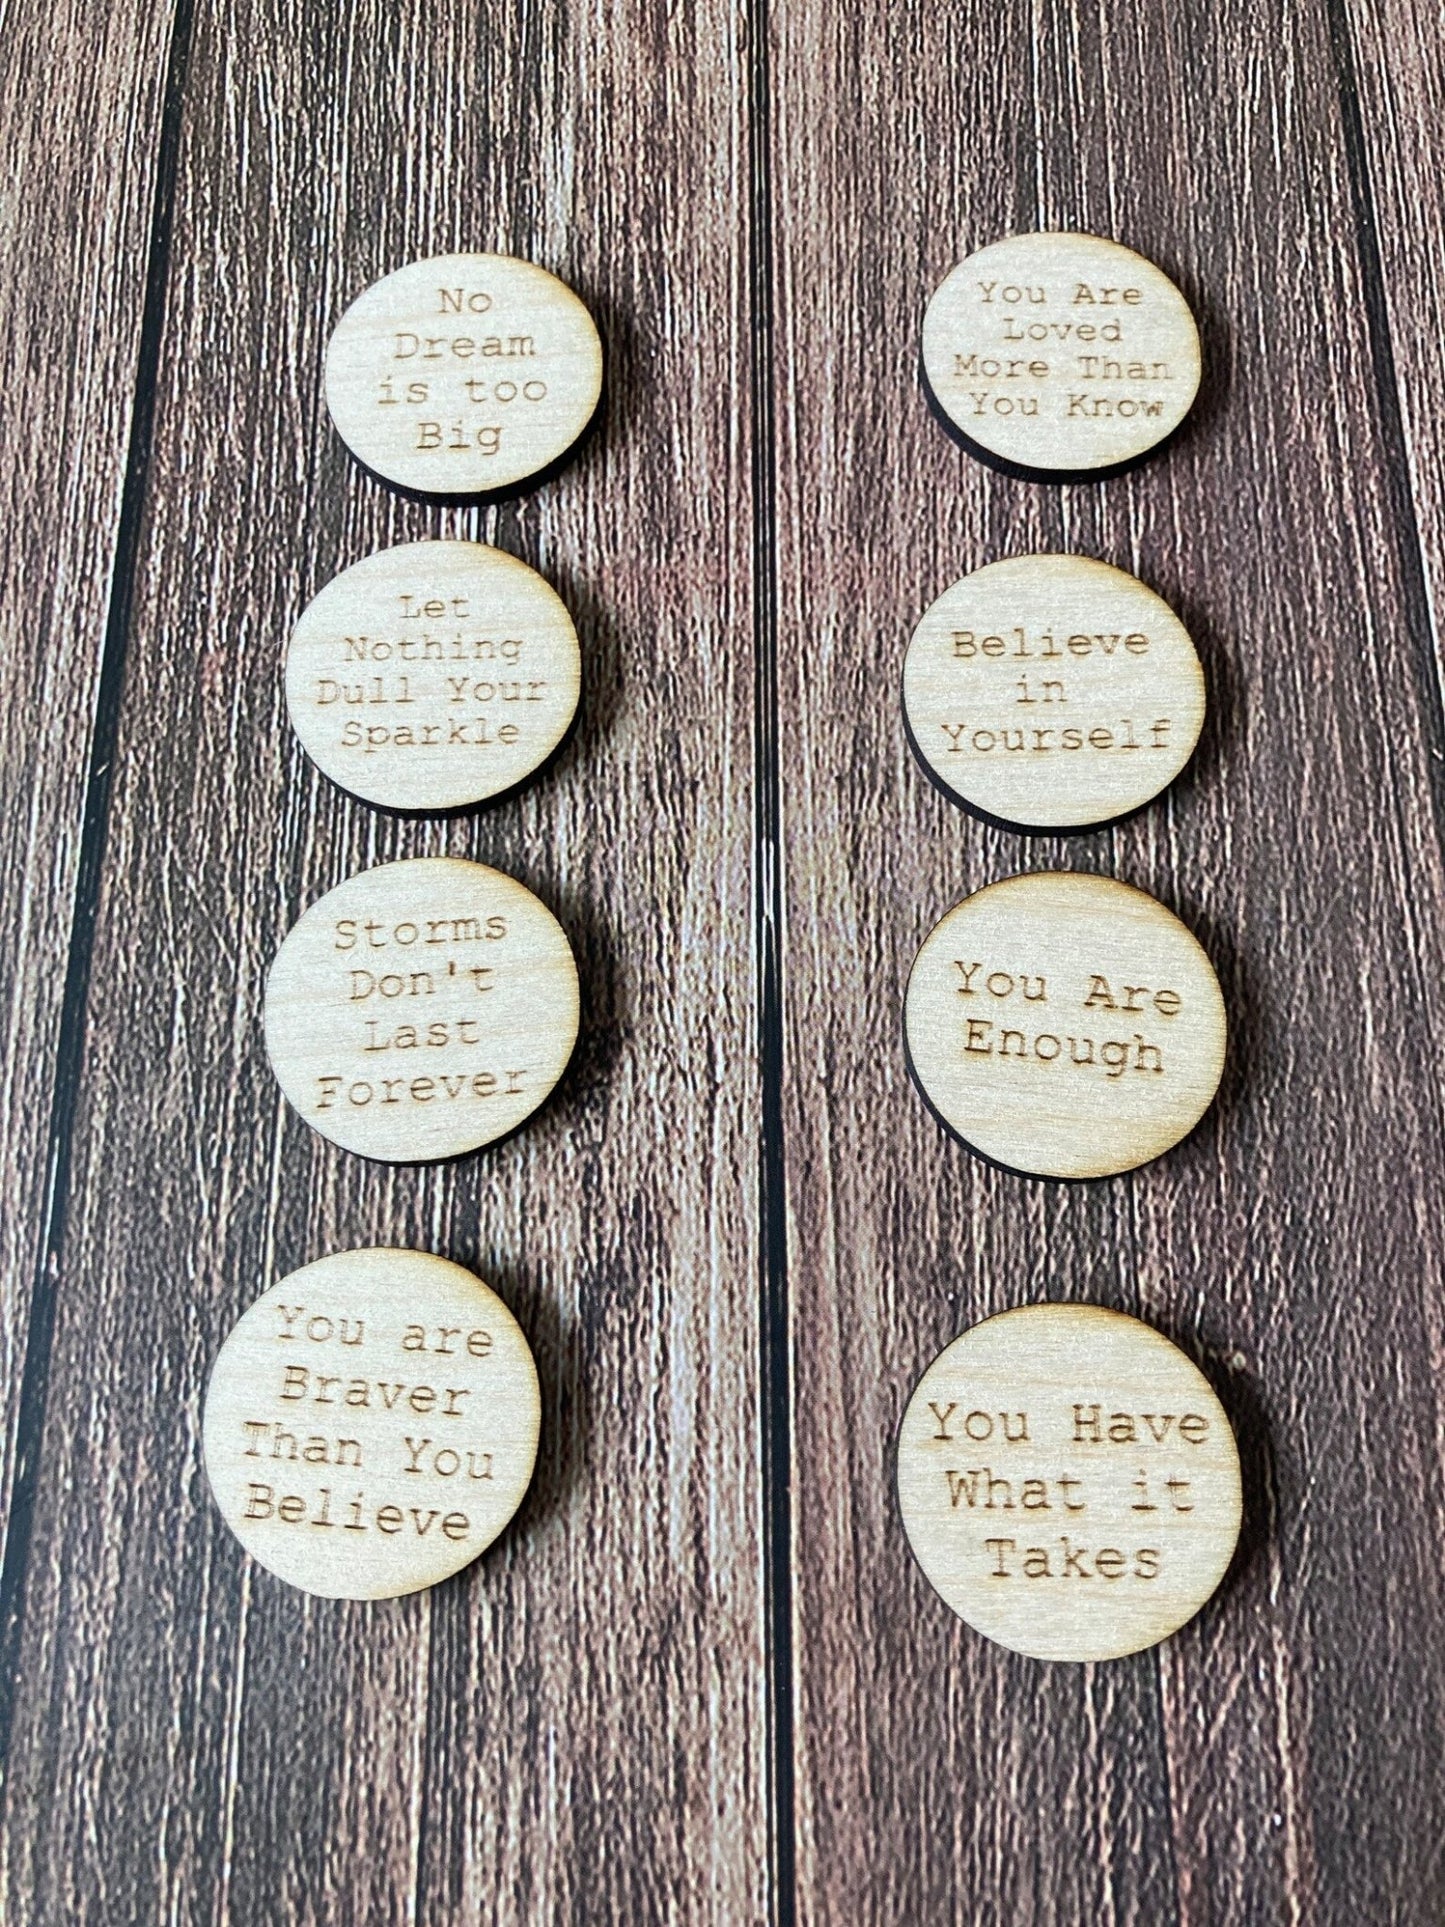 Personalised Wooden Hug Tokens (Confidence Coins) for Uplifting and Comforting Gifts - CherryGroveCraft